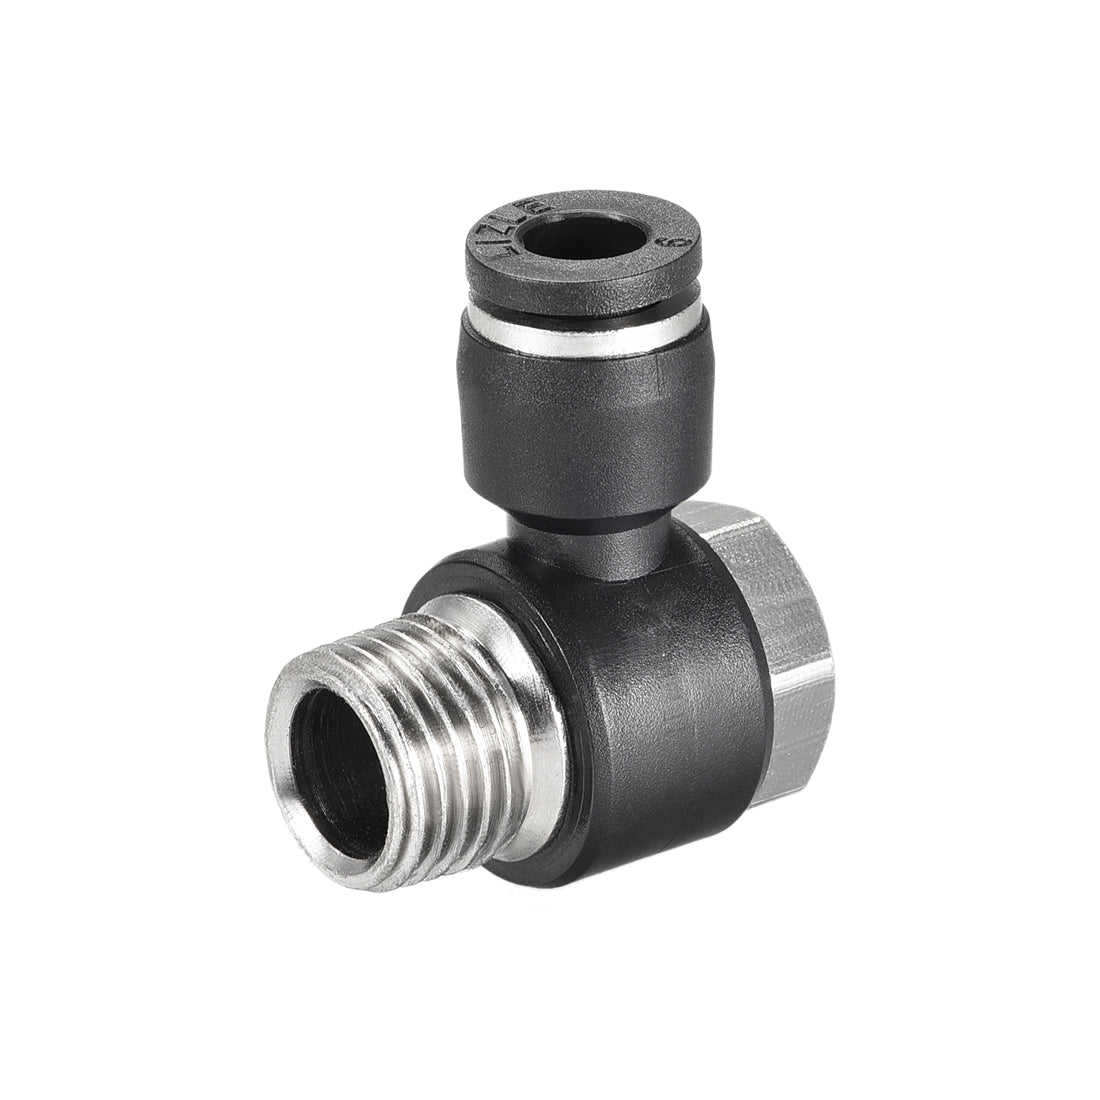 Uxcell Uxcell Pneumatic Push to Connect Tube Fitting 6mm Tube to 1/4NPT Male Thread Elbow 2Pcs